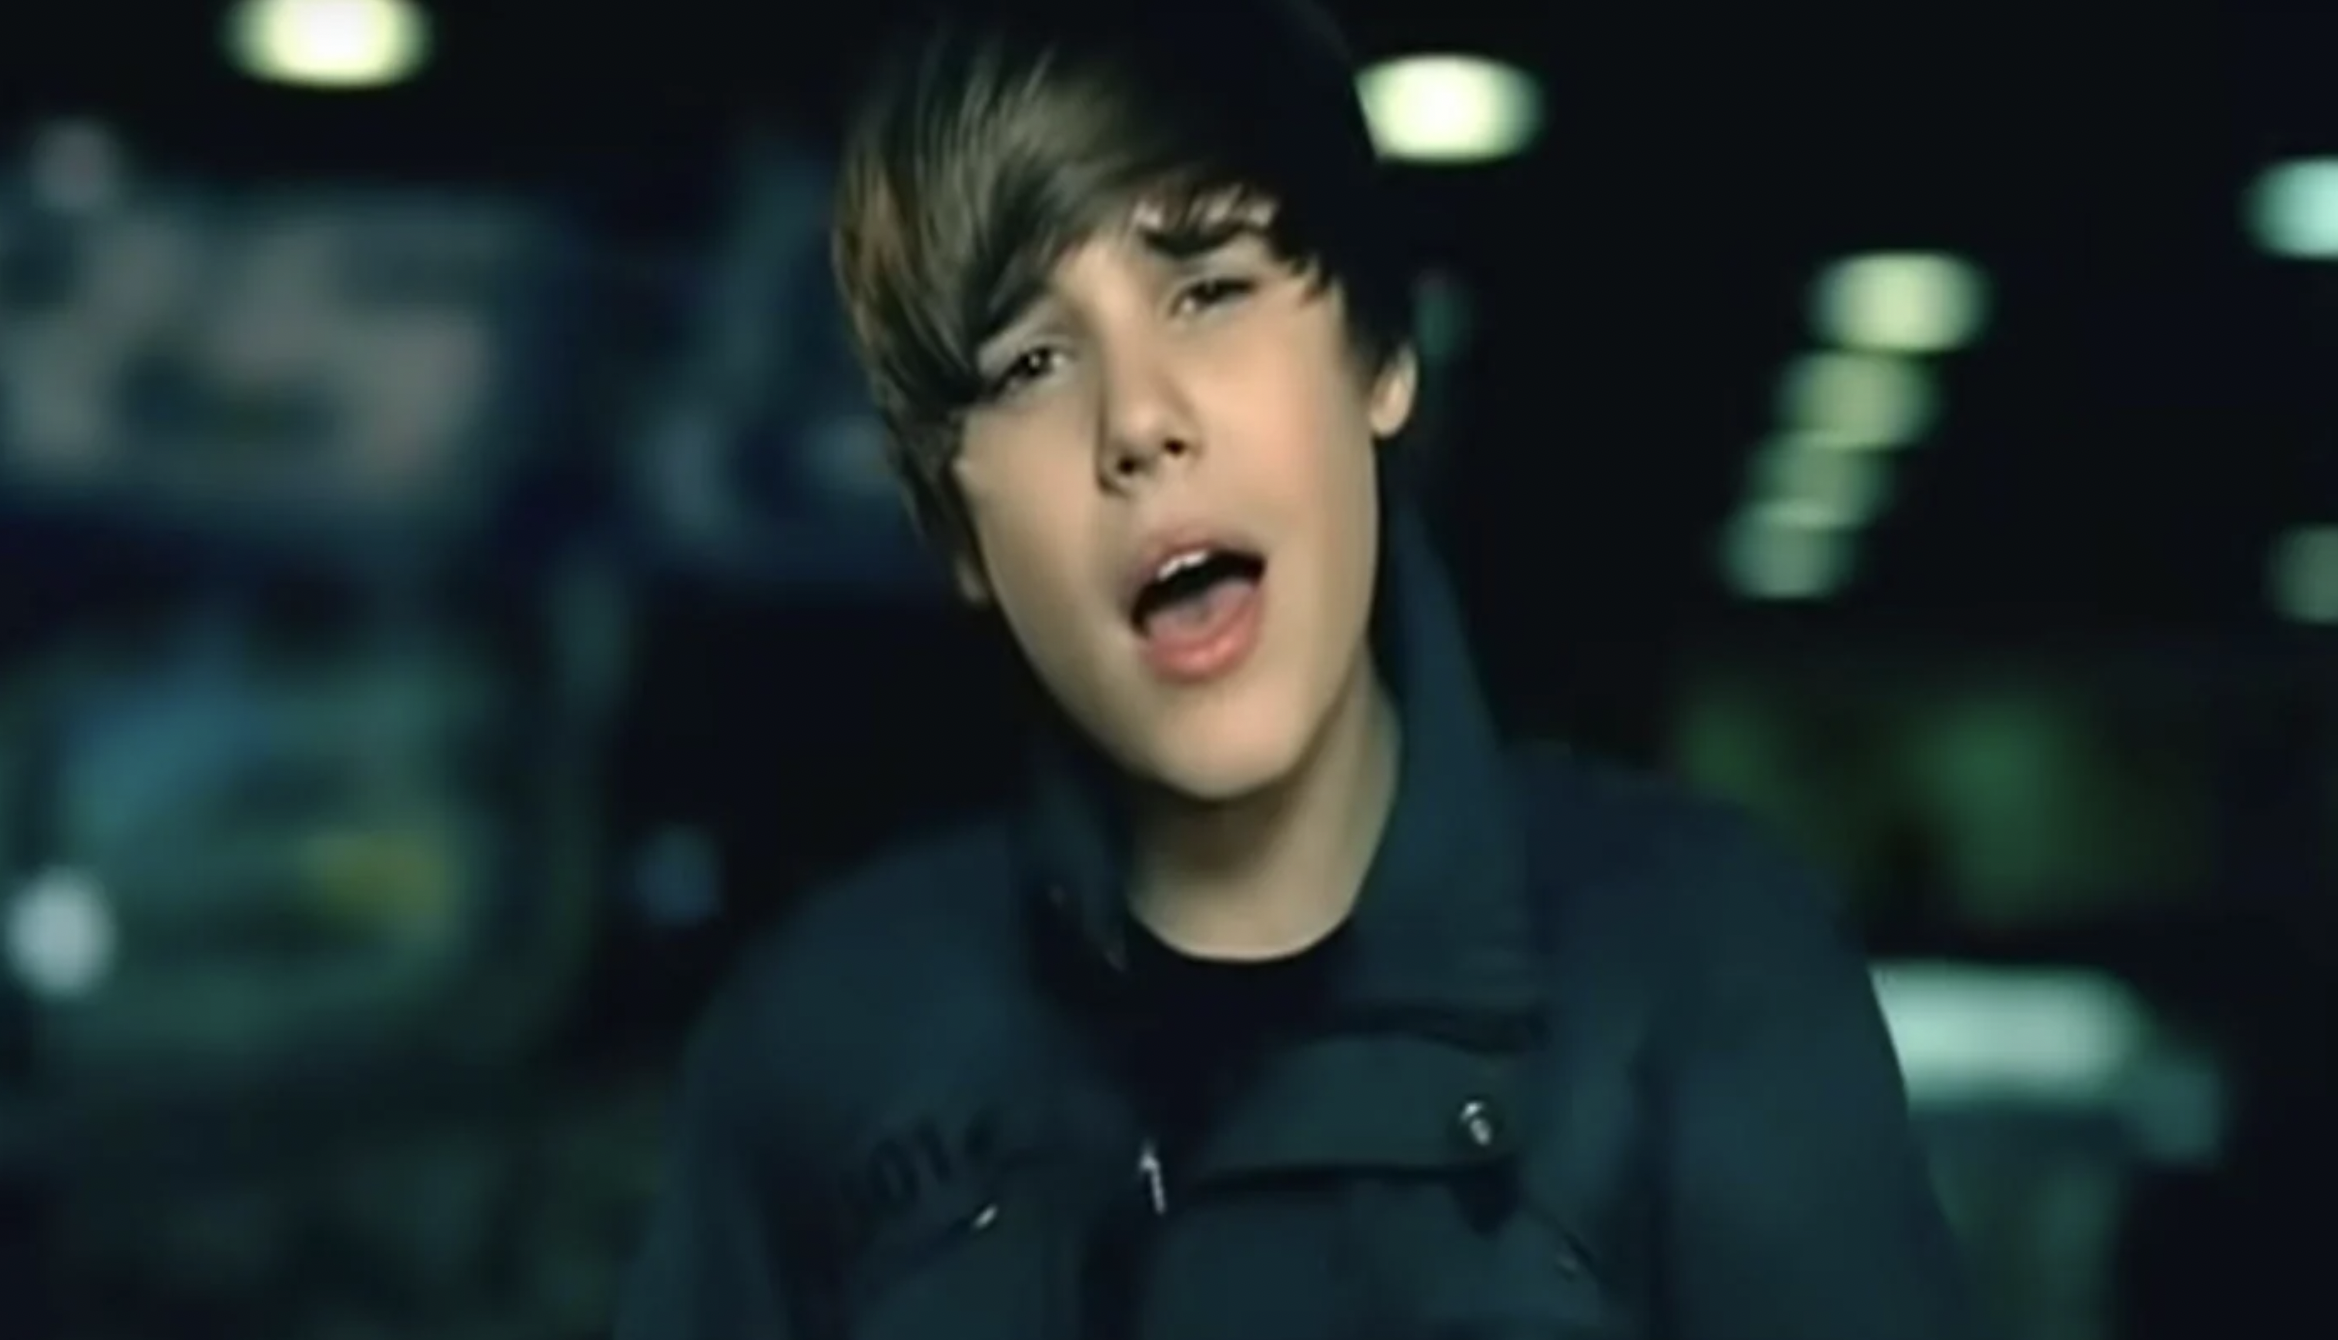 A young Justin Bieber sings while looking at the camera, a blurry night time street is behind him